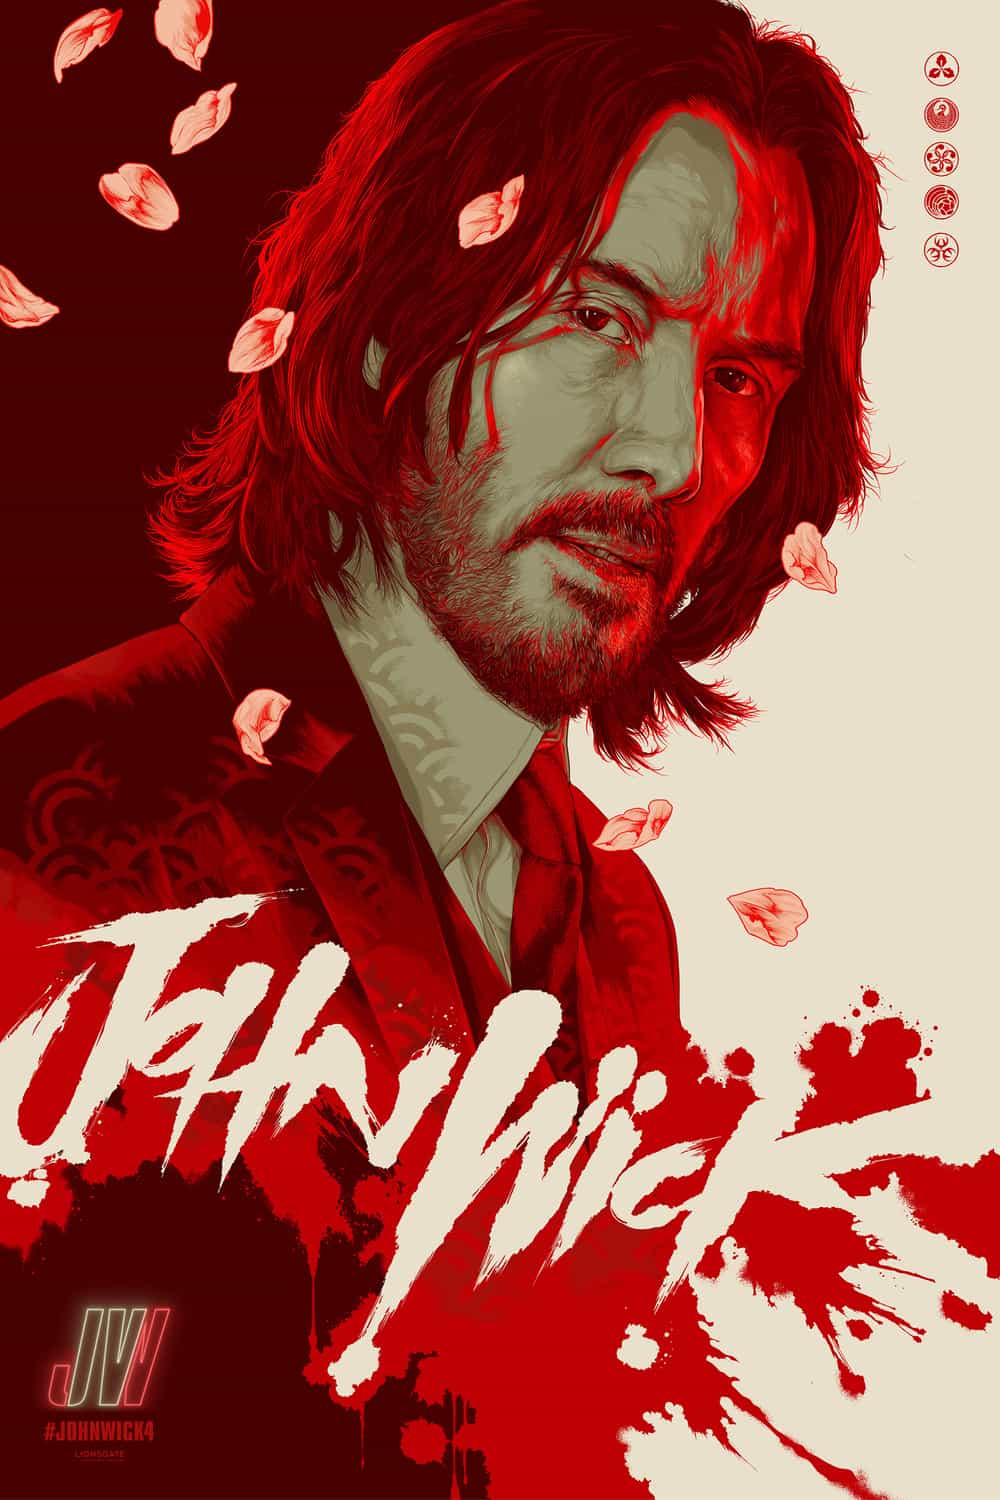 John Wick Chapter 4 is given a 15 age rating for strong violence, language